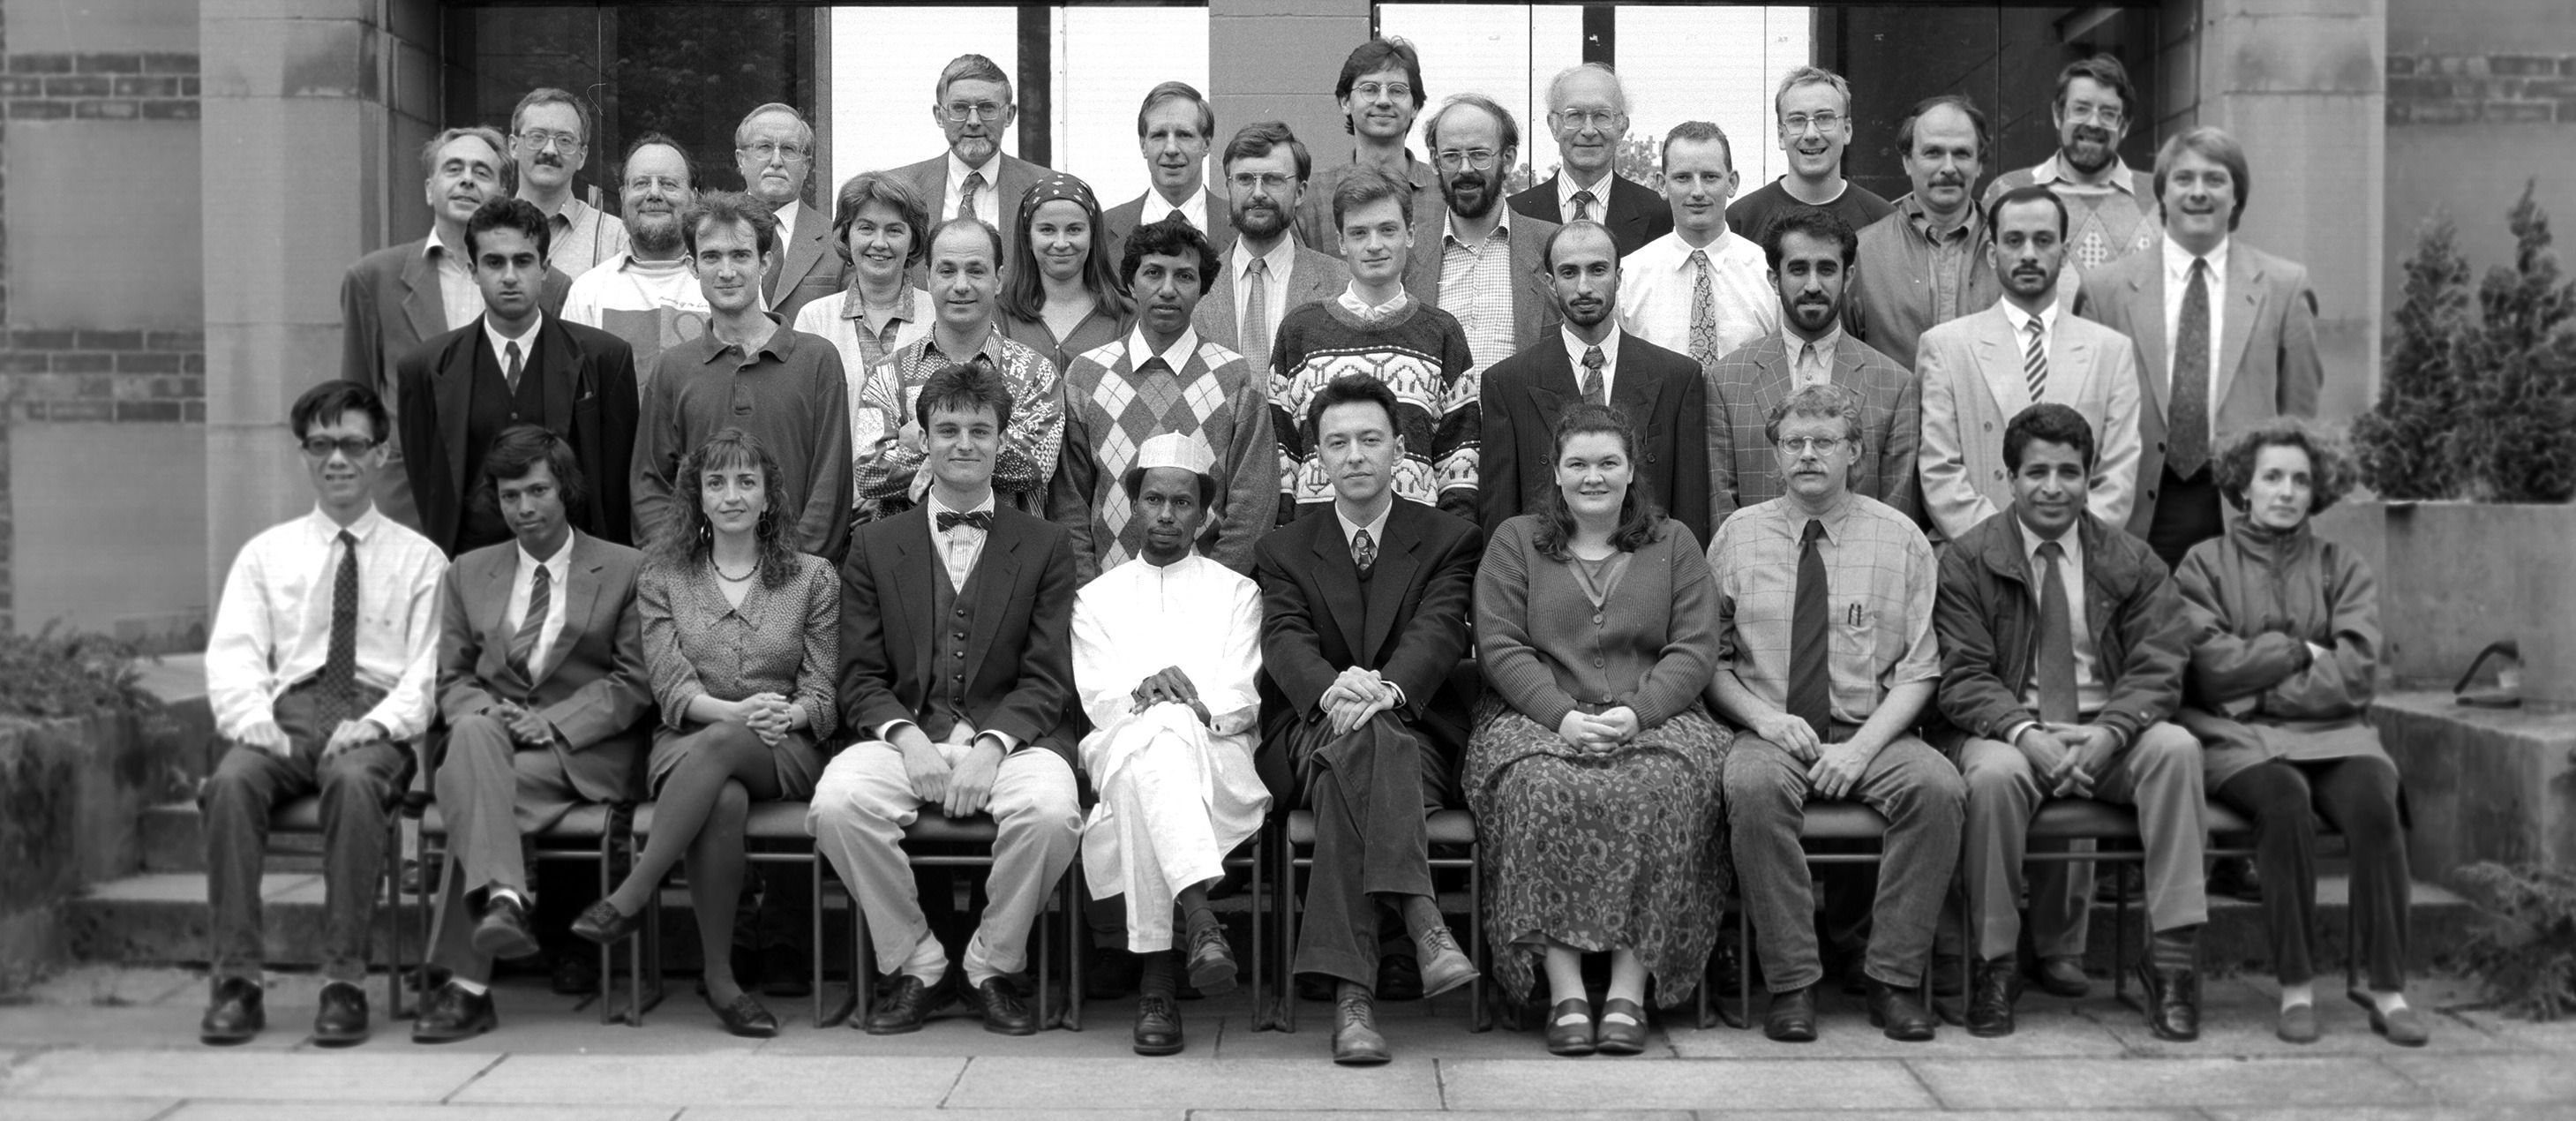 Geography Department Postgraduate Group Photo from 1993